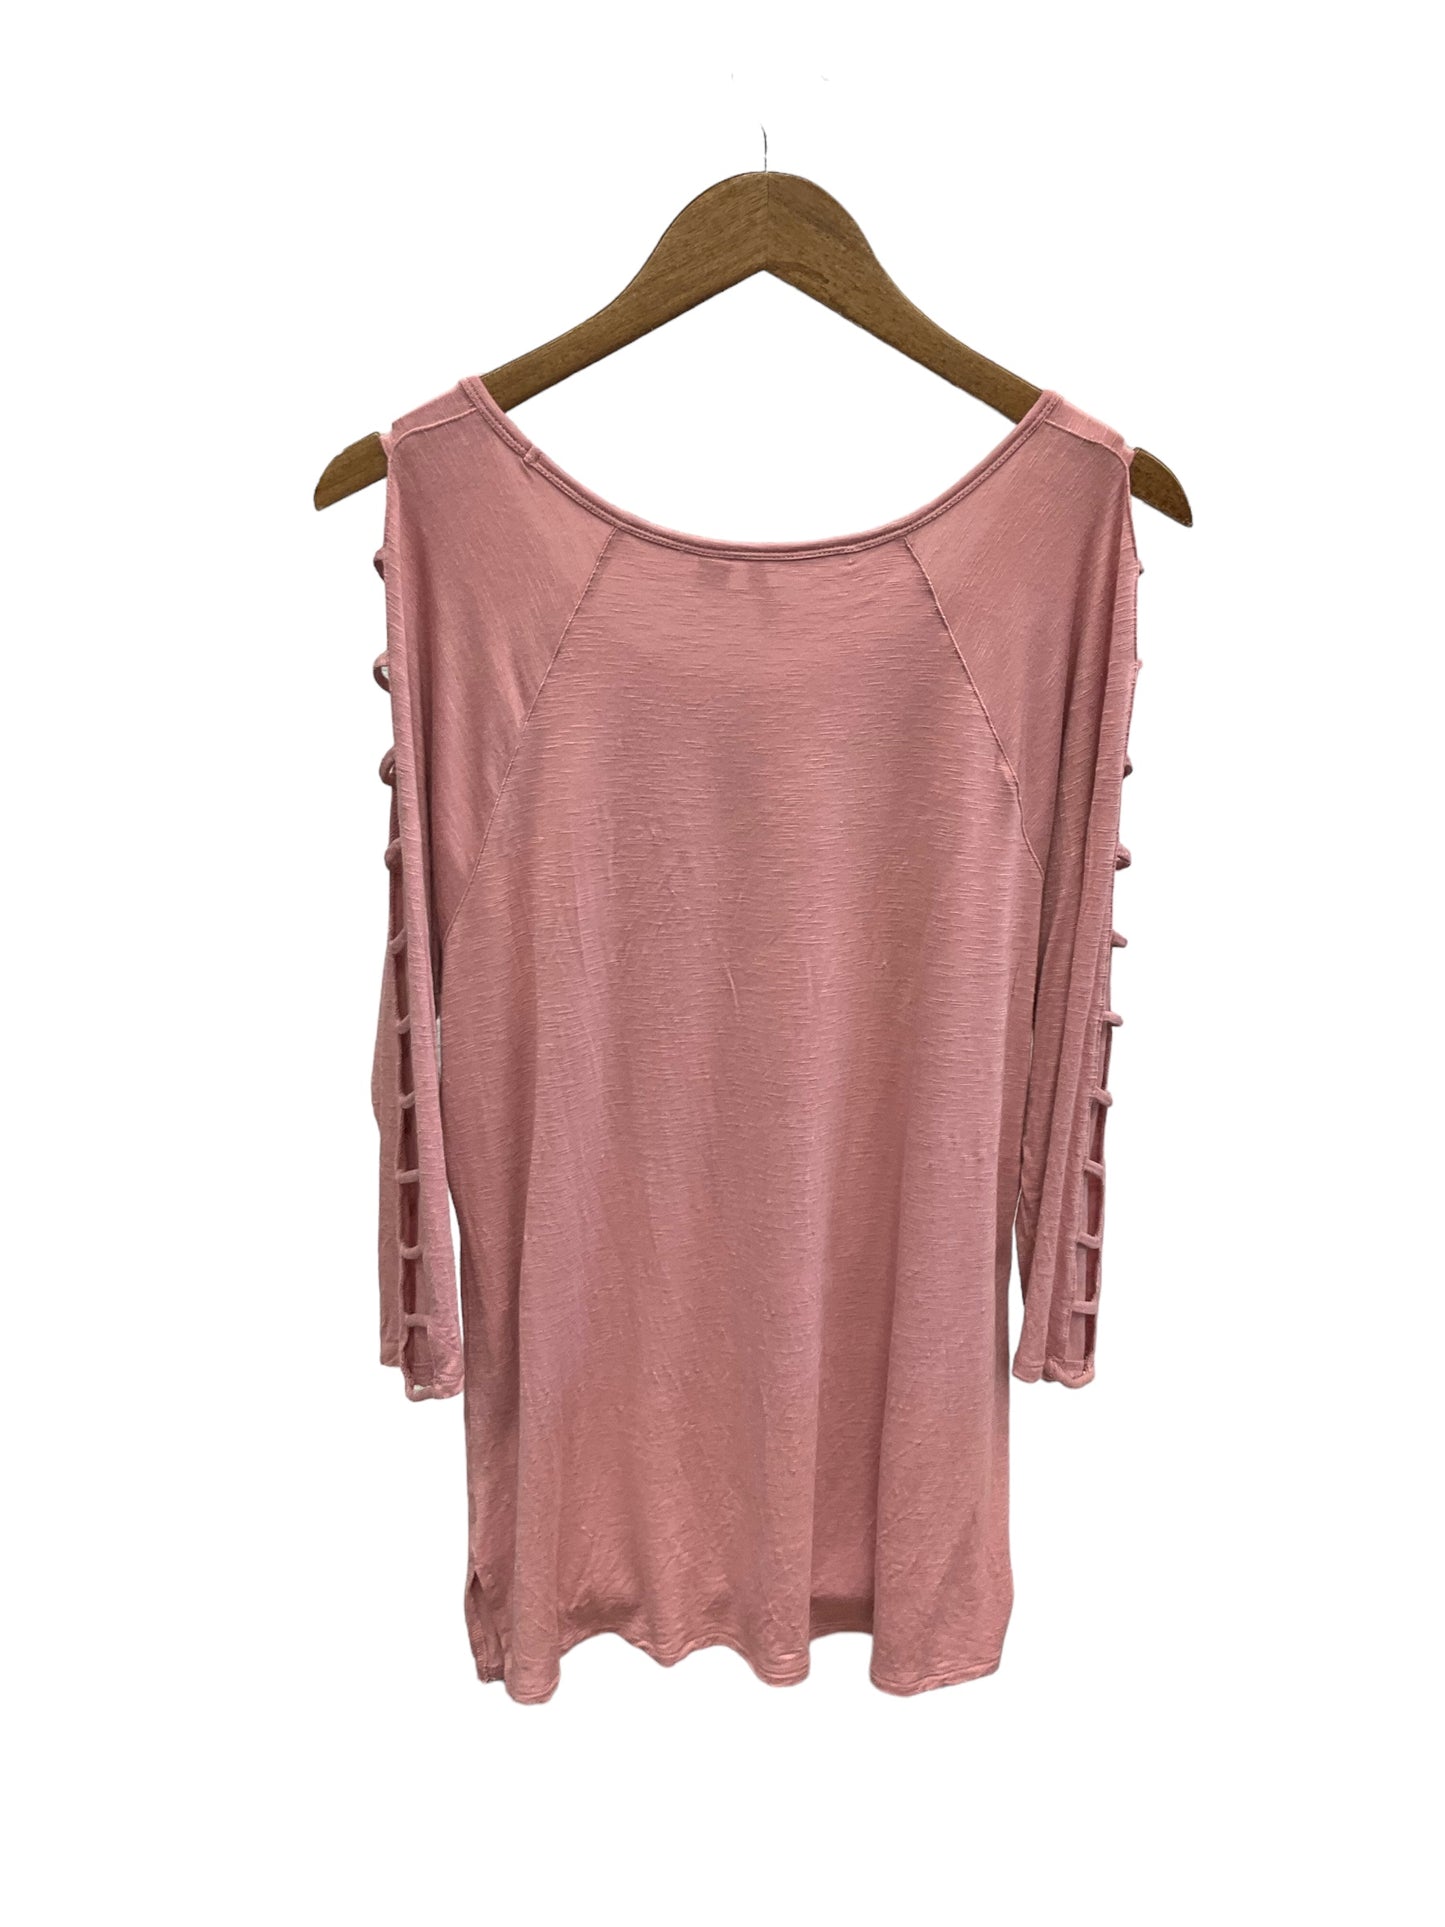 Top Long Sleeve By Cato  Size: L